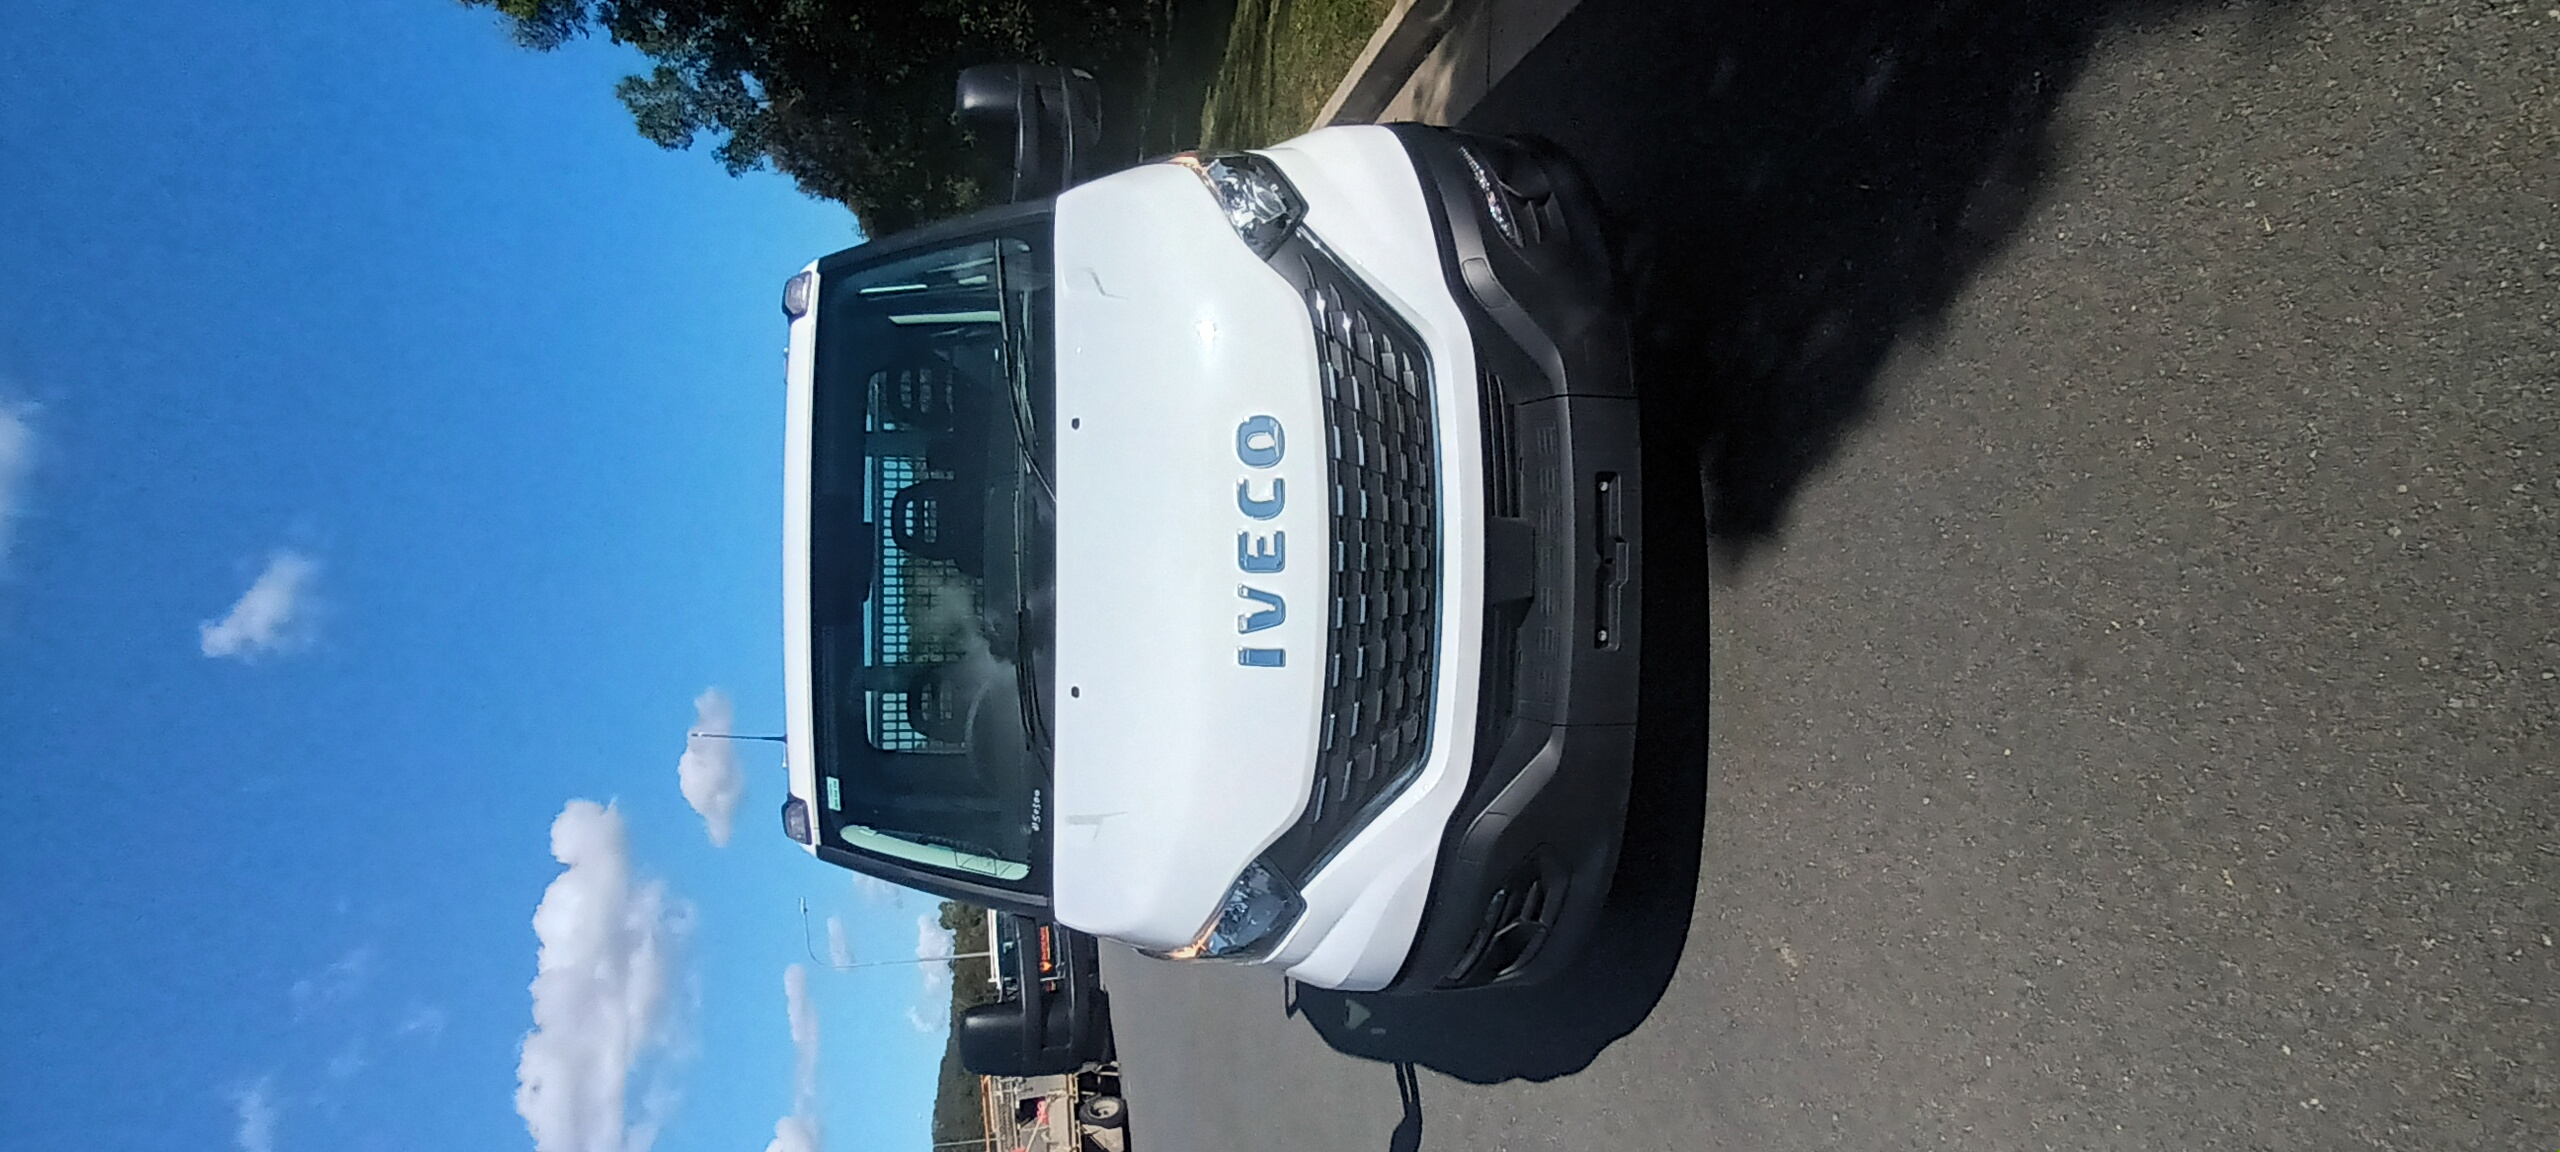 2022 Iveco Daily E6 45C DAILY SINGLE CAB 3750WB 180EVID Other Image 13